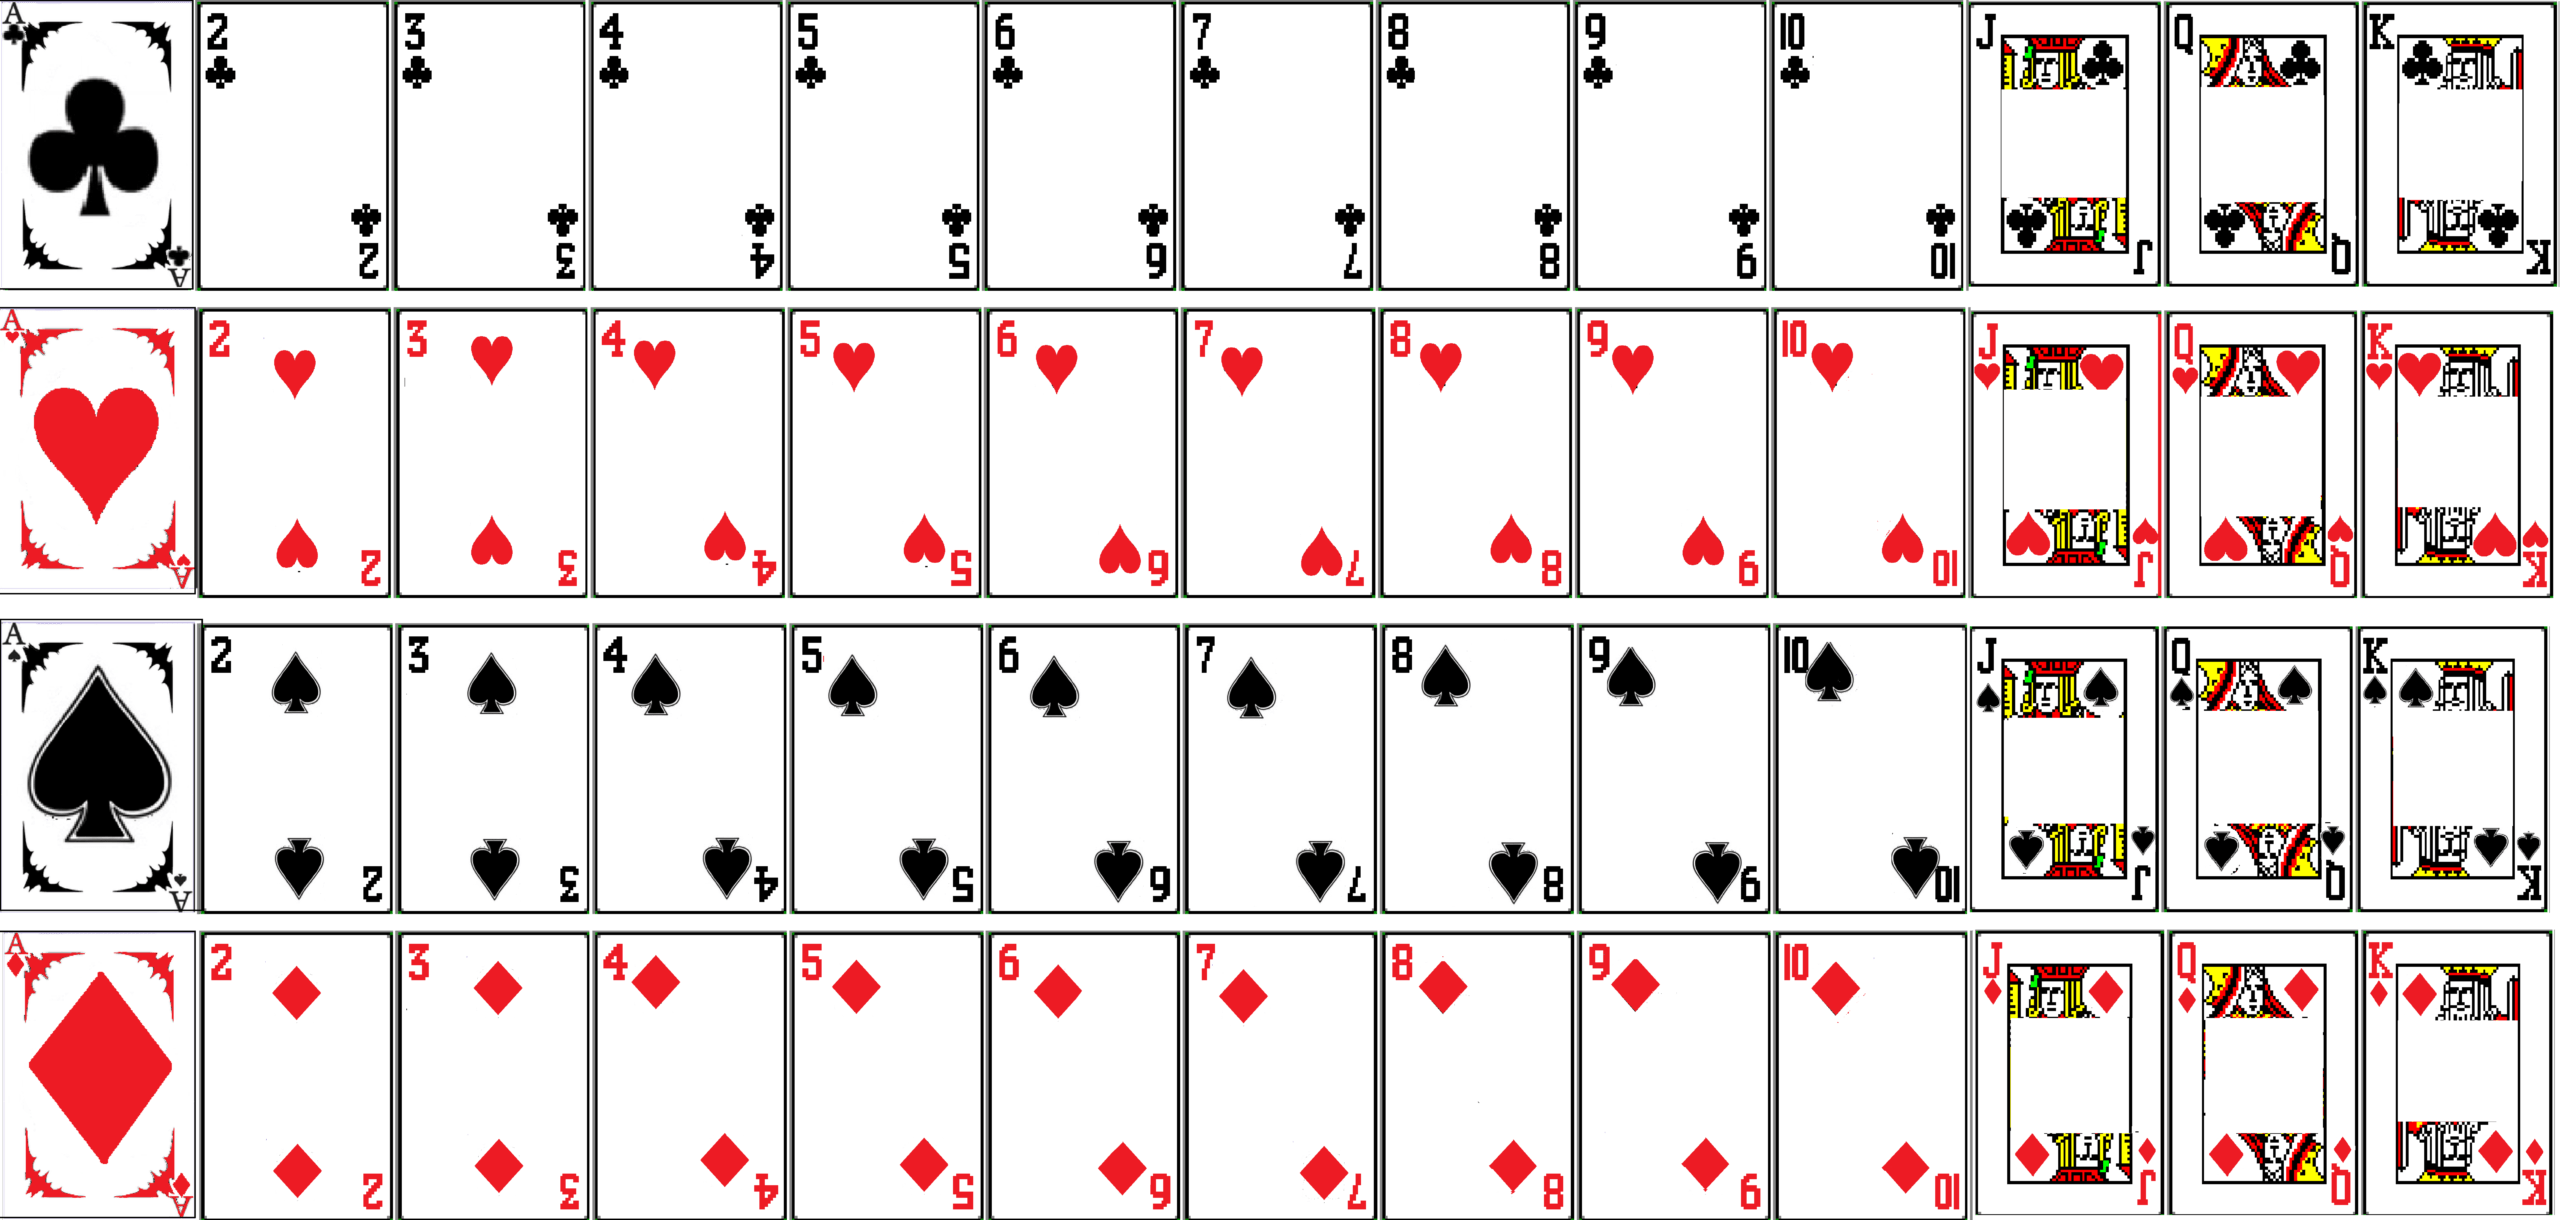 Not Learning Spider Solitaire Flashcards Hanguk Babble In Deck Of 